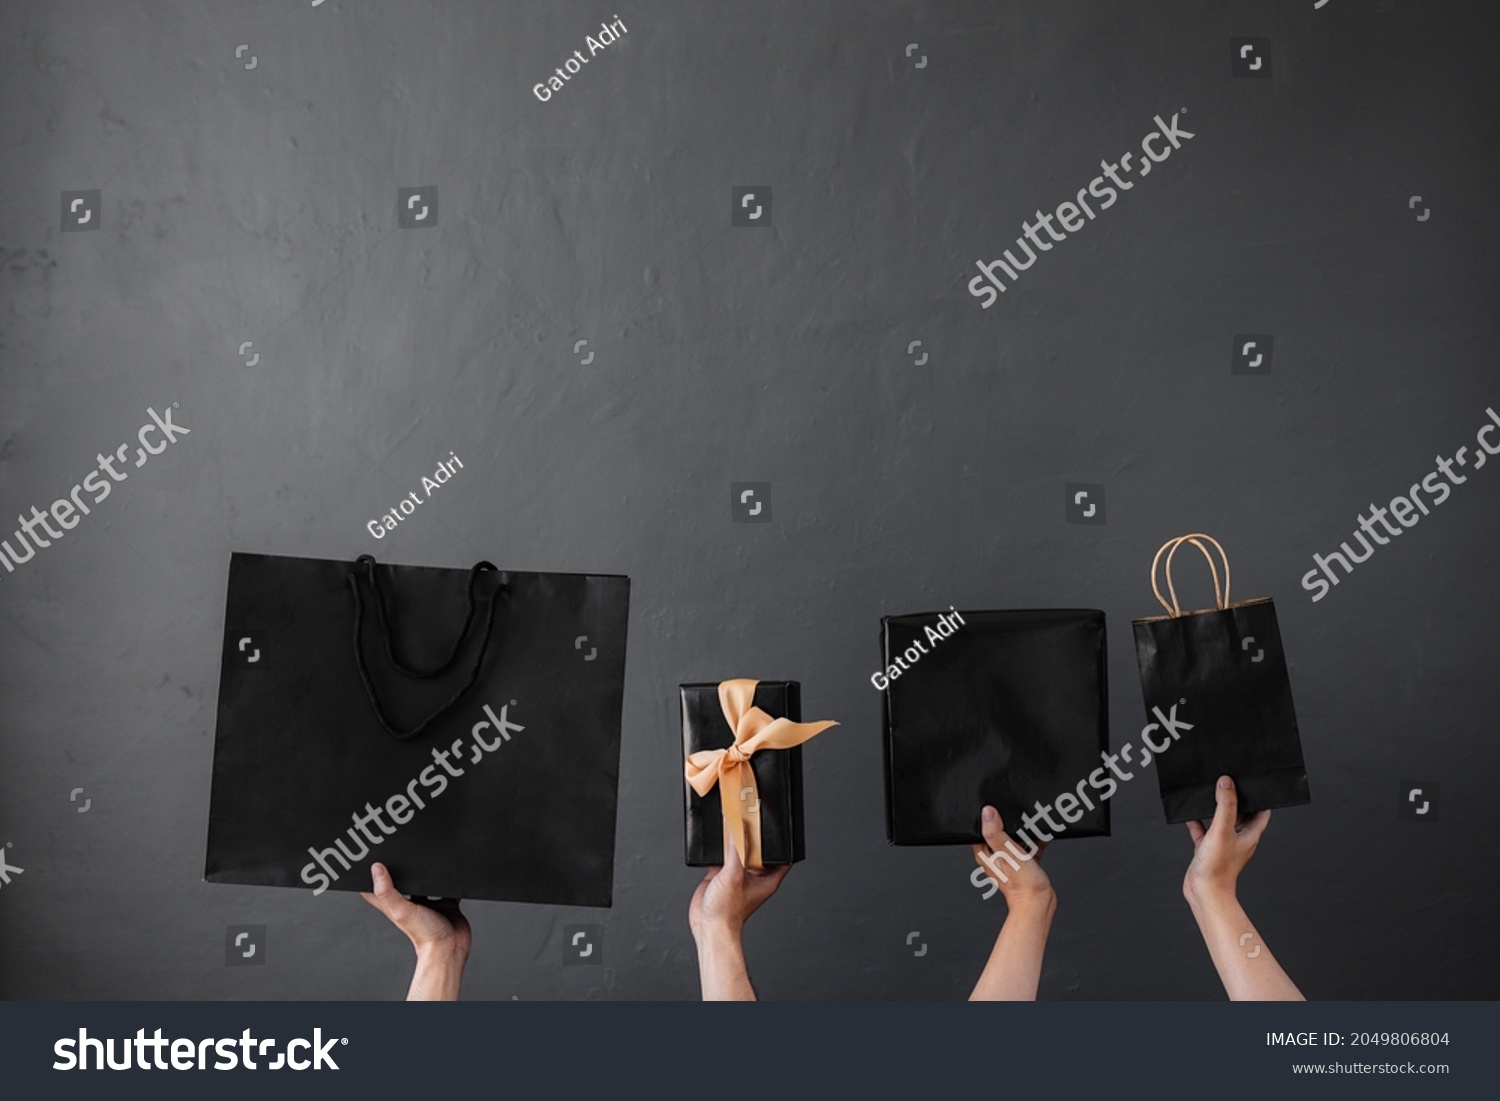 Crop of hand holding shopping bag or goodie bag for shopaholic online shopping background and black friday promotion #2049806804